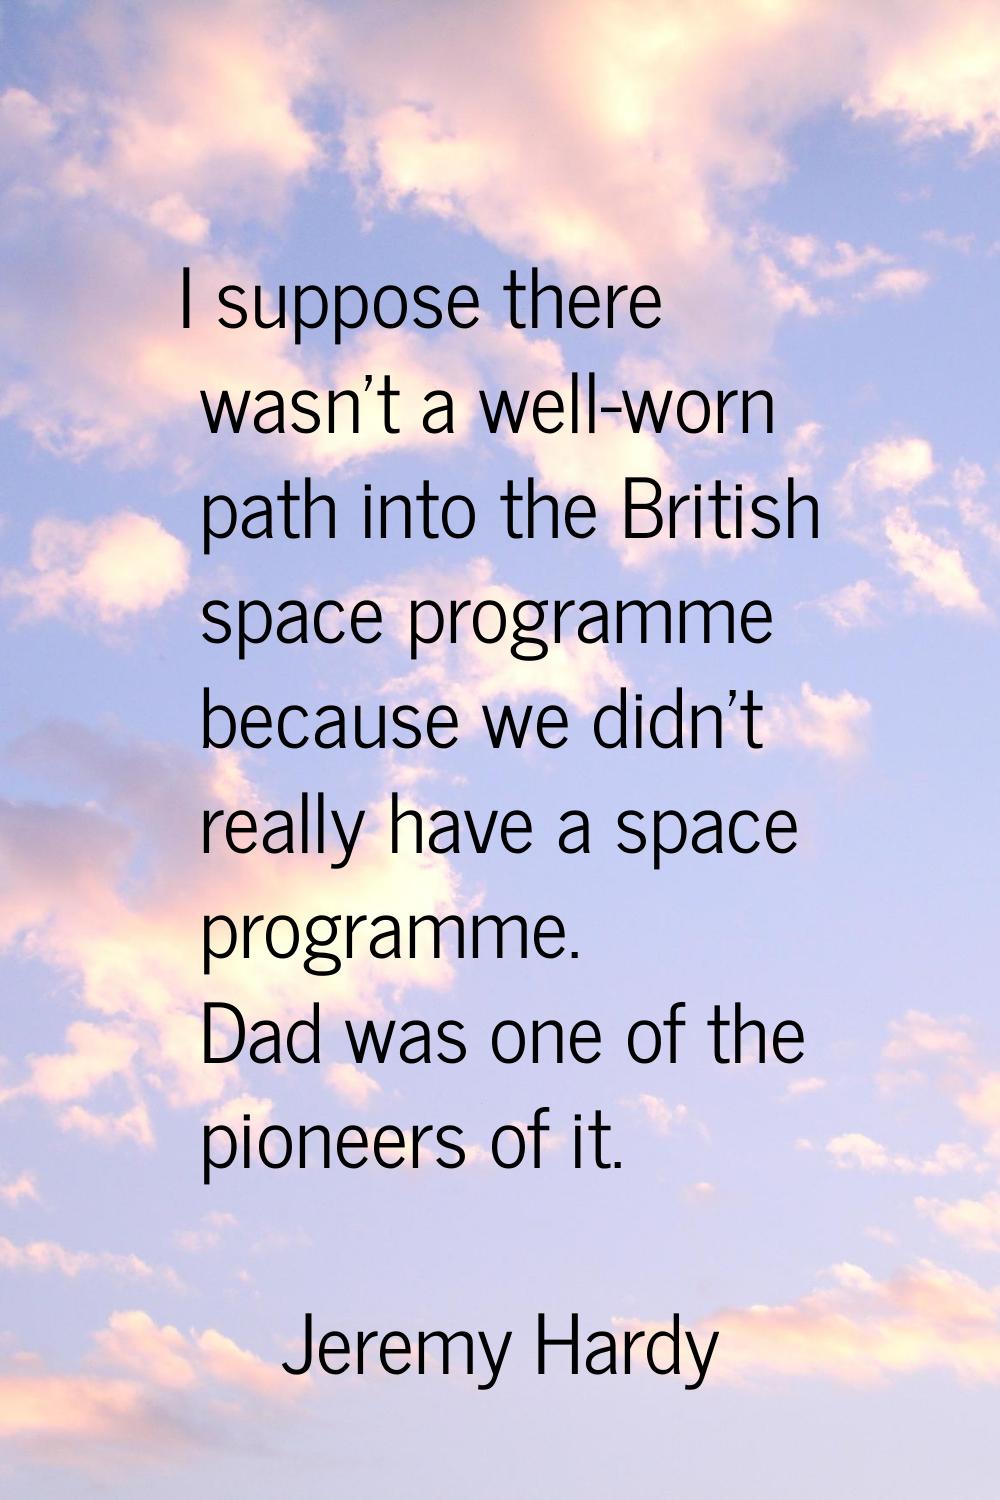 I suppose there wasn't a well-worn path into the British space programme because we didn't really h